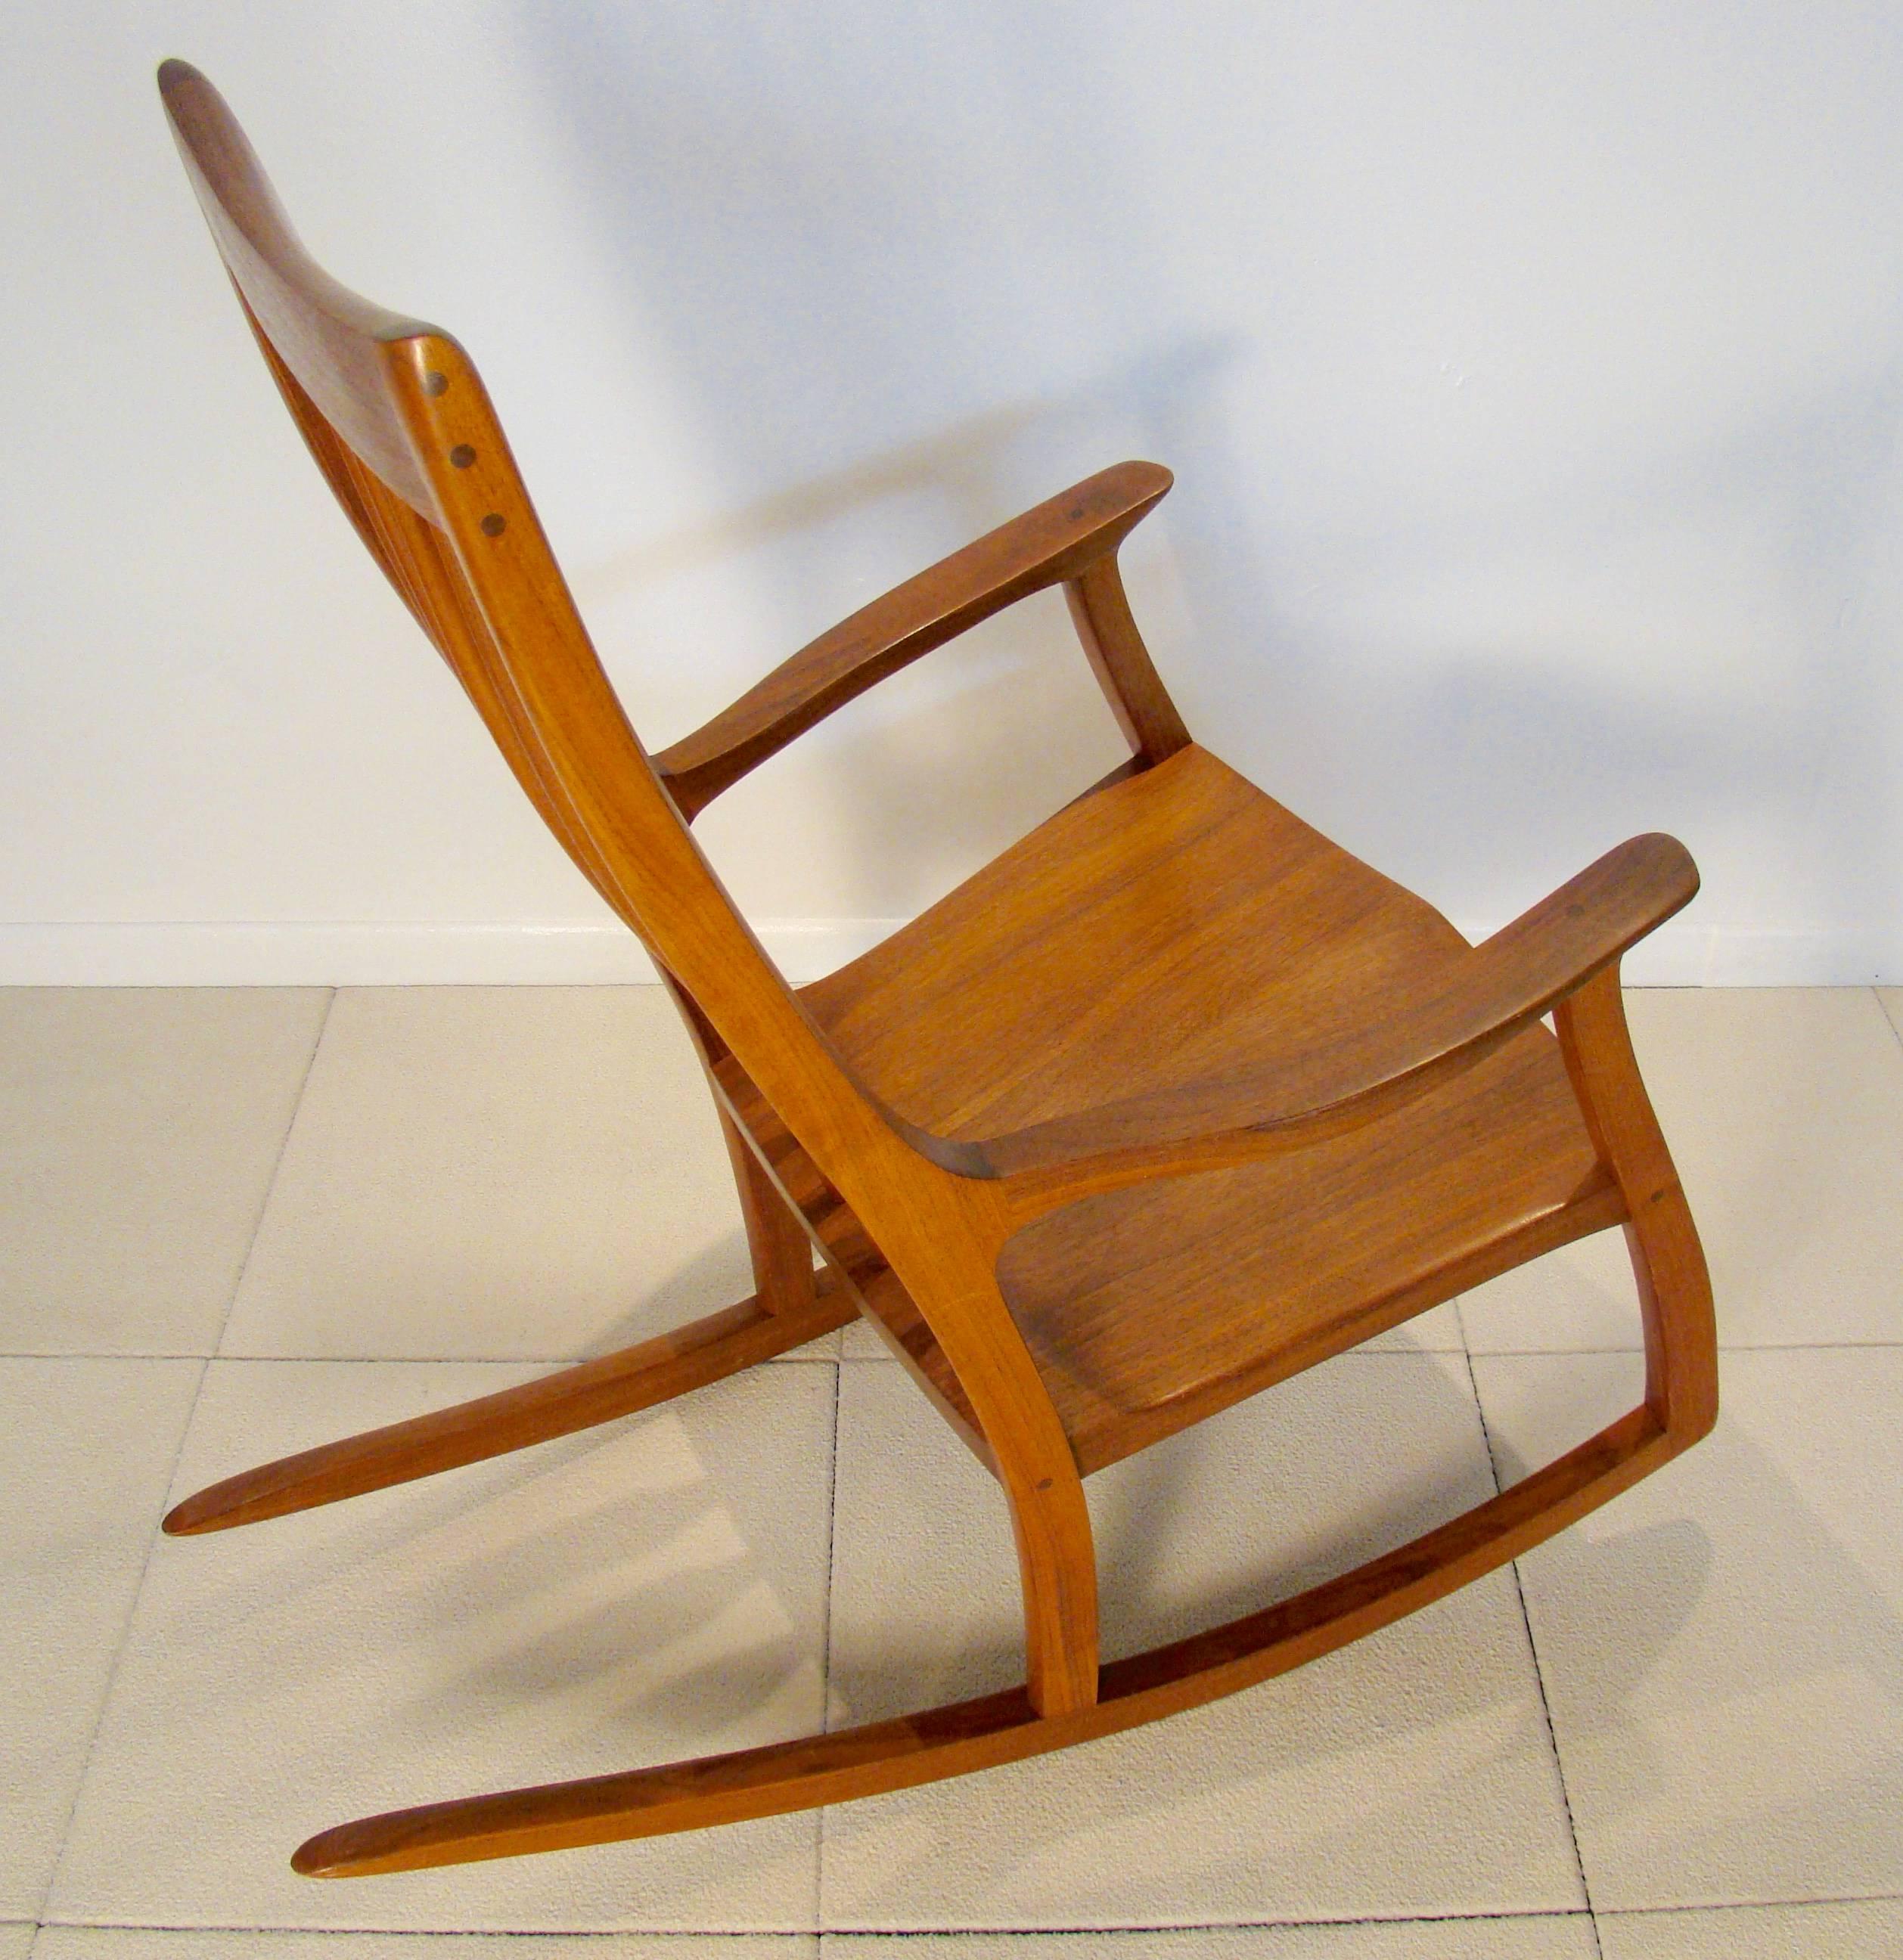 Late 20th Century Modern Rocker Designed and Built by Kevin Grey